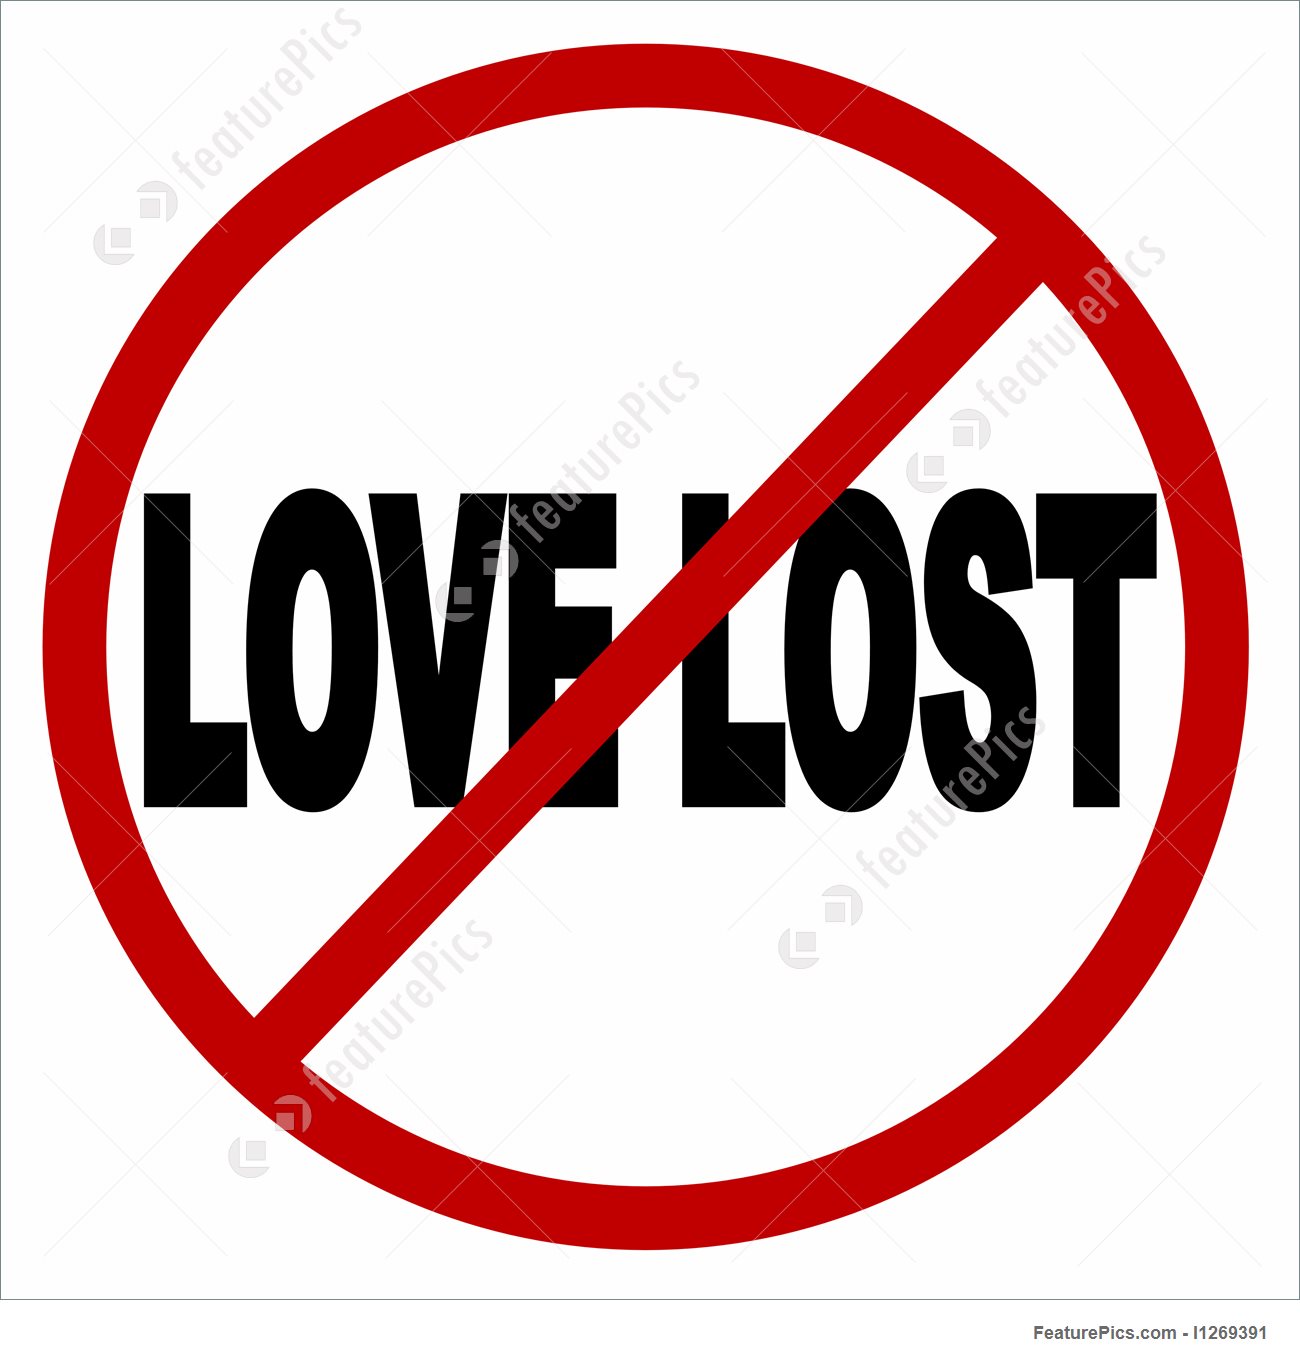 No Love Lost High Quality Background on Wallpapers Vista